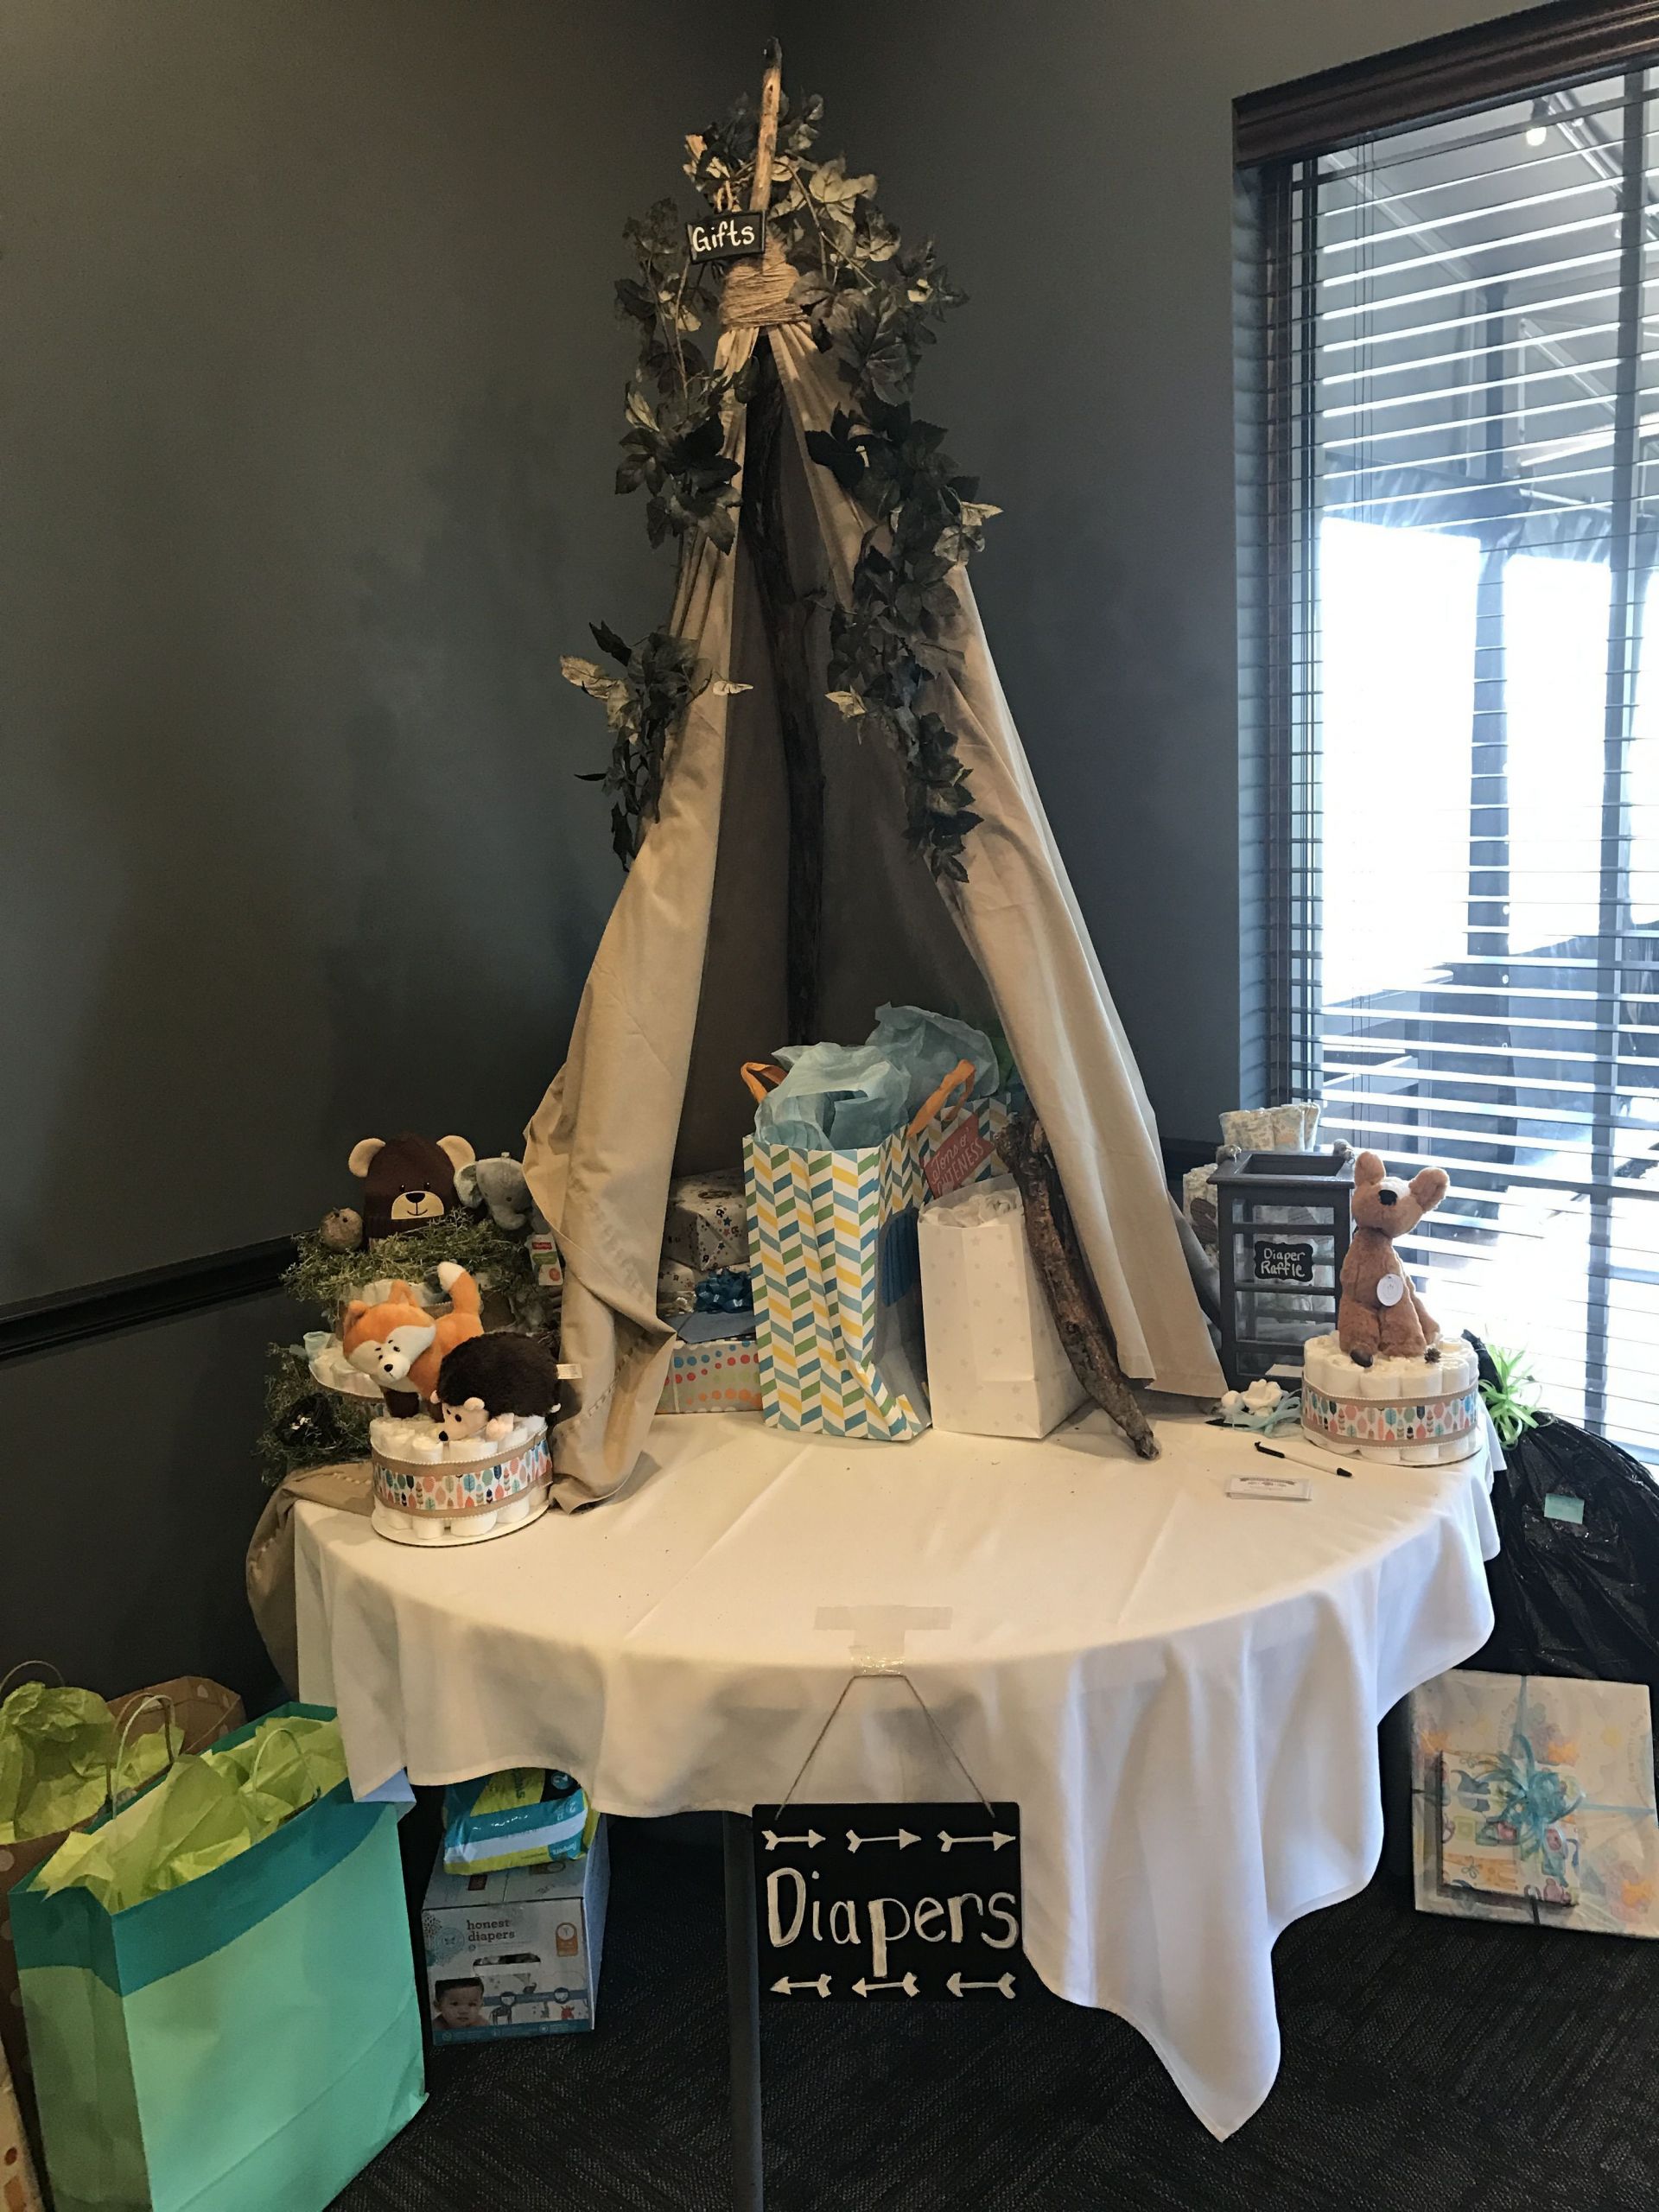 Gift Table Ideas For Baby Shower
 DIY tipi woodland theme baby shower t tent and diaper